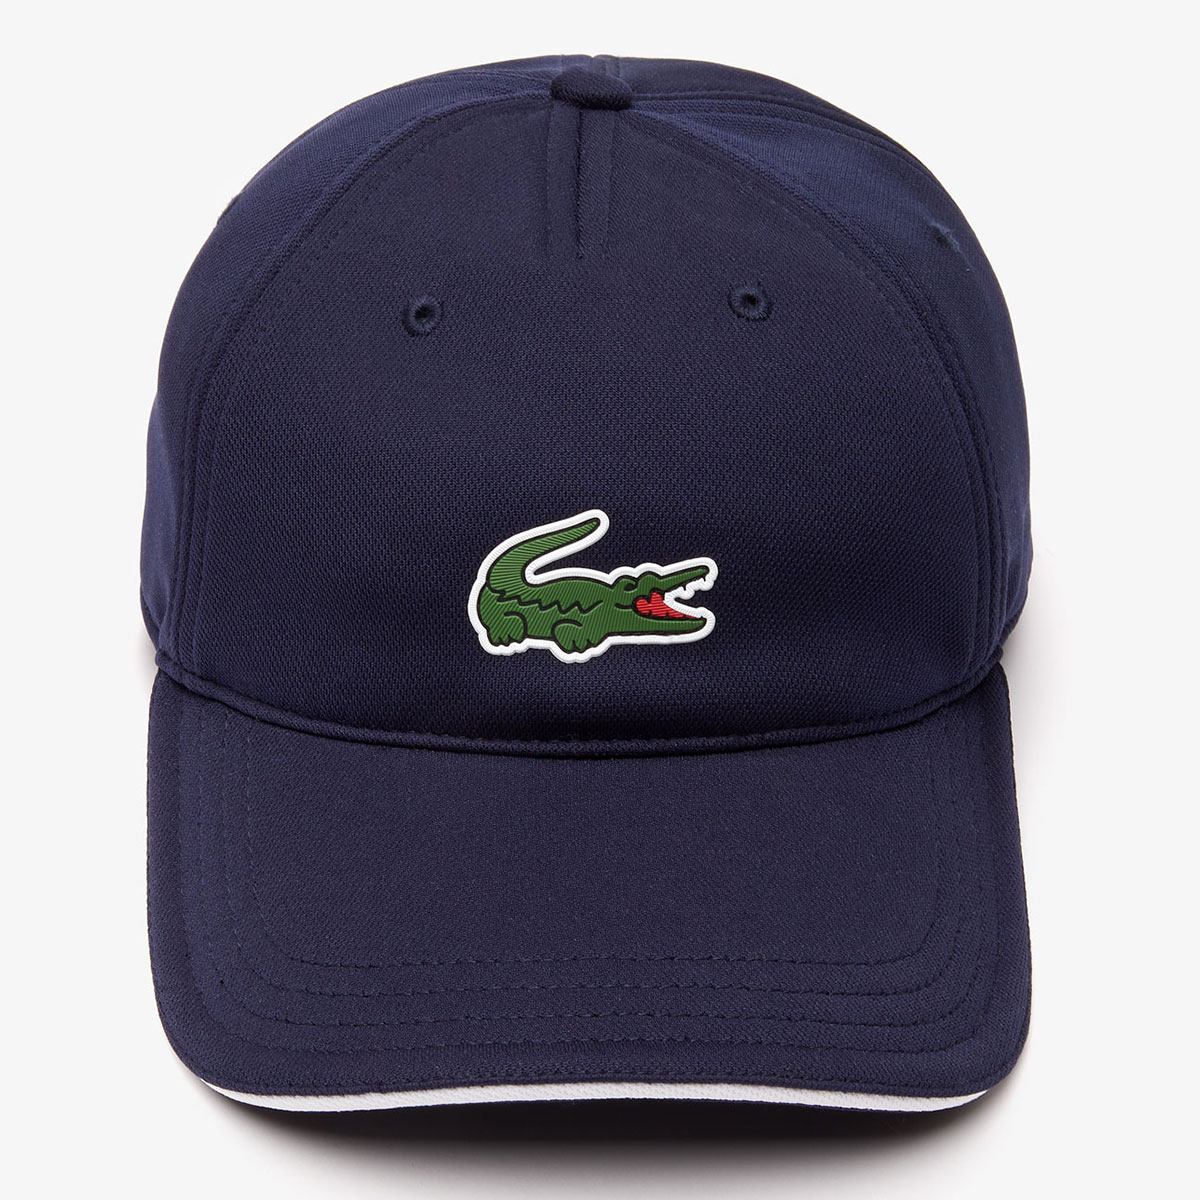 Lacoste SPORT Breathable Piqué Golf Cap from american golf